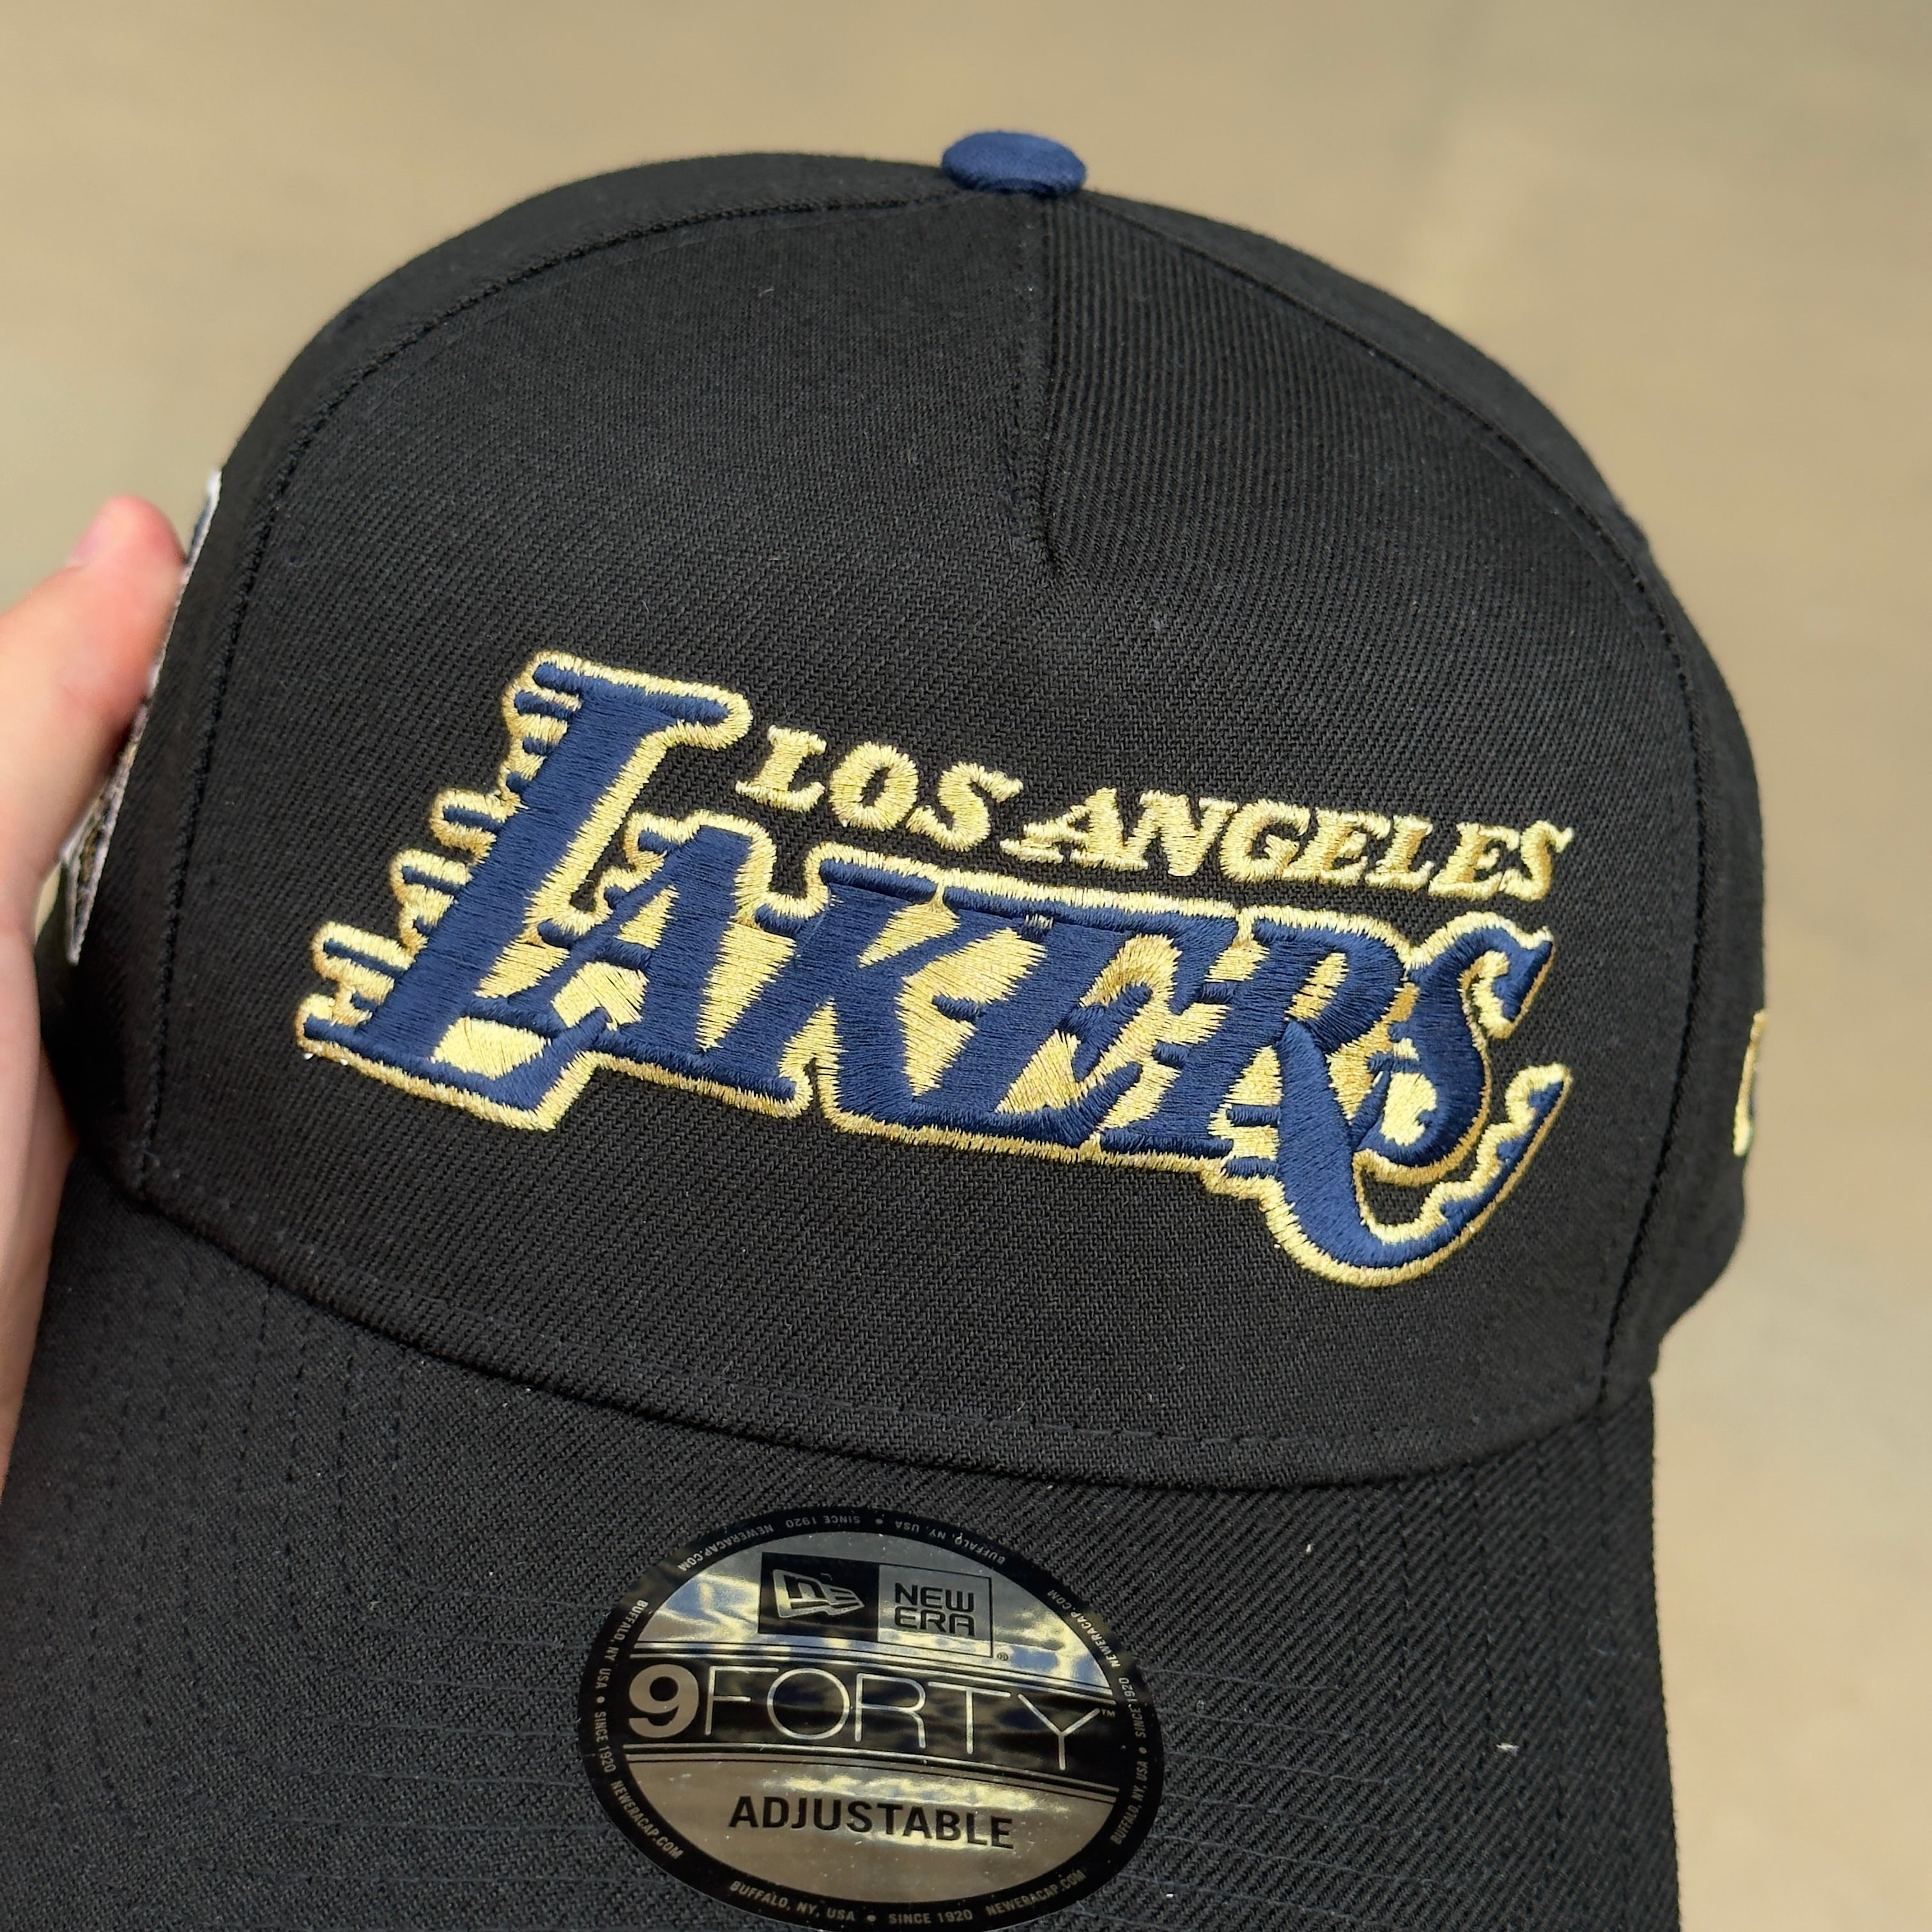 NEW Black Los Angeles Lakers 7x Champs New Era 9Forty Adjustable One Size A-Frame